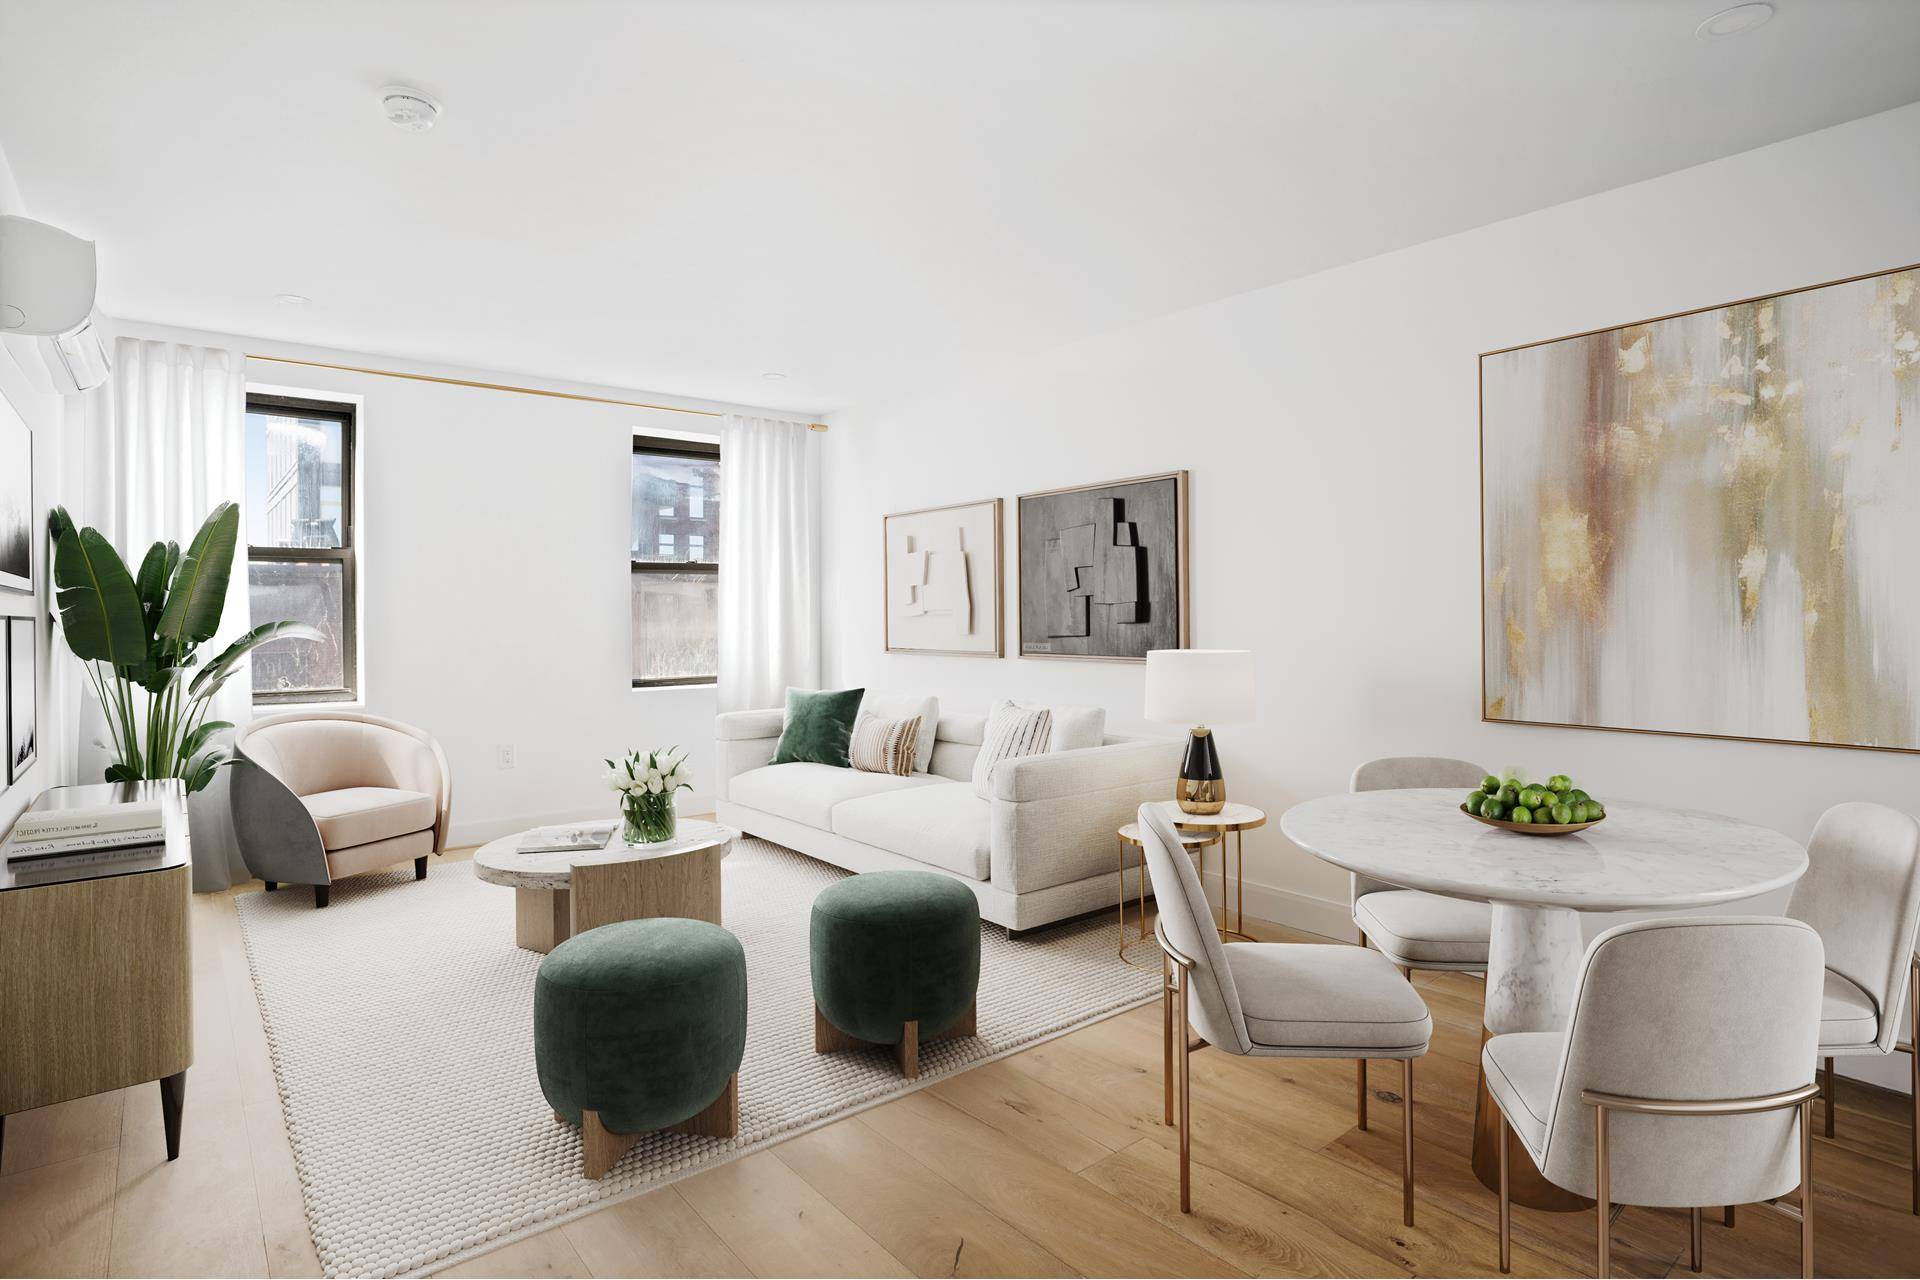 115 Pacific Street is a collection of five brand new, fully renovated rental apartments in the sought after Cobble Hill Neighborhood.